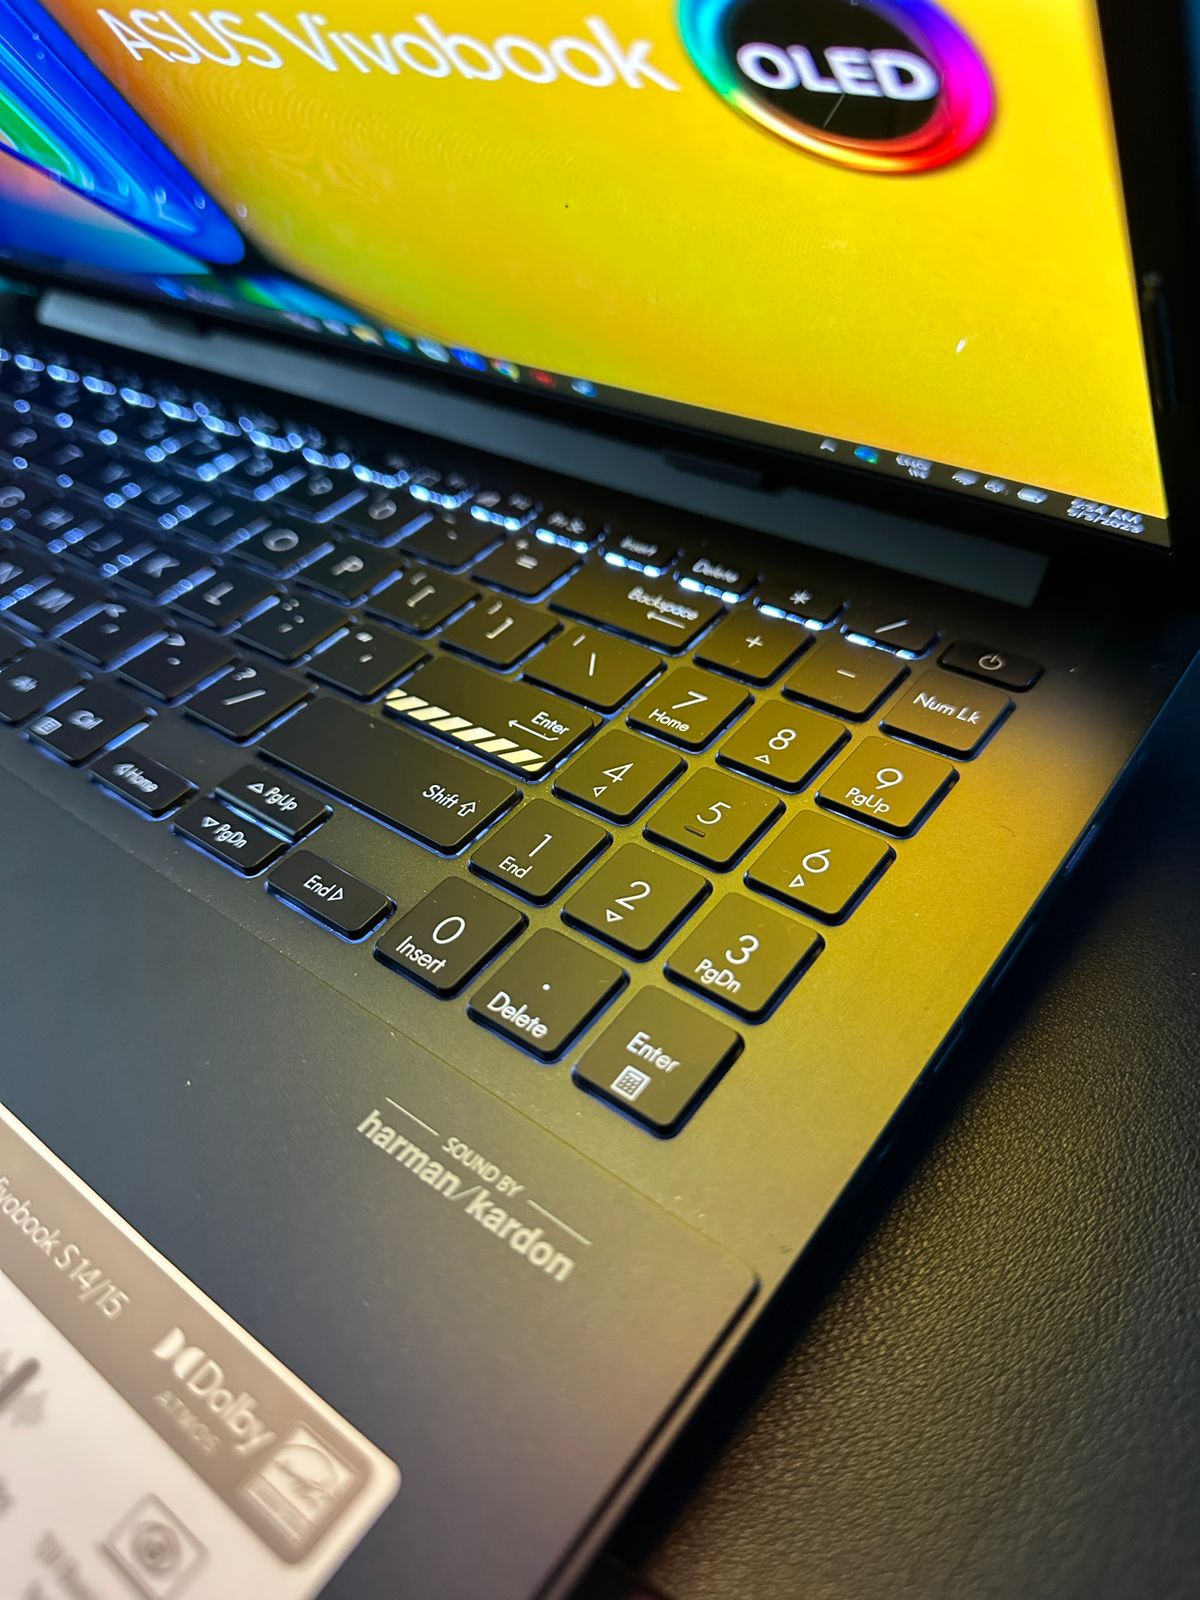 asus vivobook s15 oled full review: keyboard & trackpad